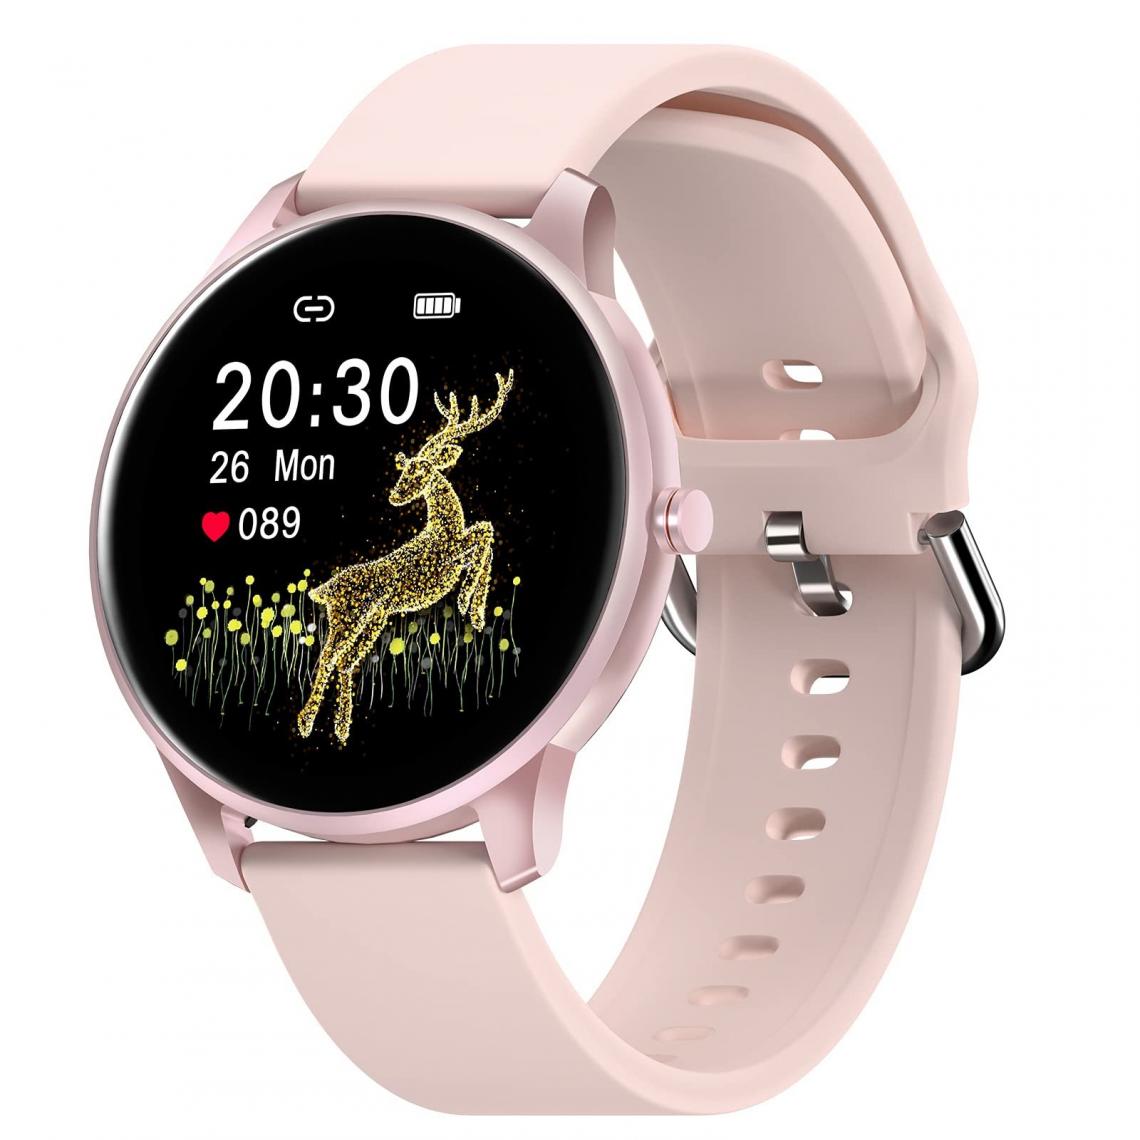 Chronotech Montres - Chronus Smart Watch with 1.3 inch Touch Screen Smart Watch for Men Women Waterproof IP68, Heart Rate Monitor Pedometer Sleep for Android / iOS / iPhone(Rose) - Montre connectée